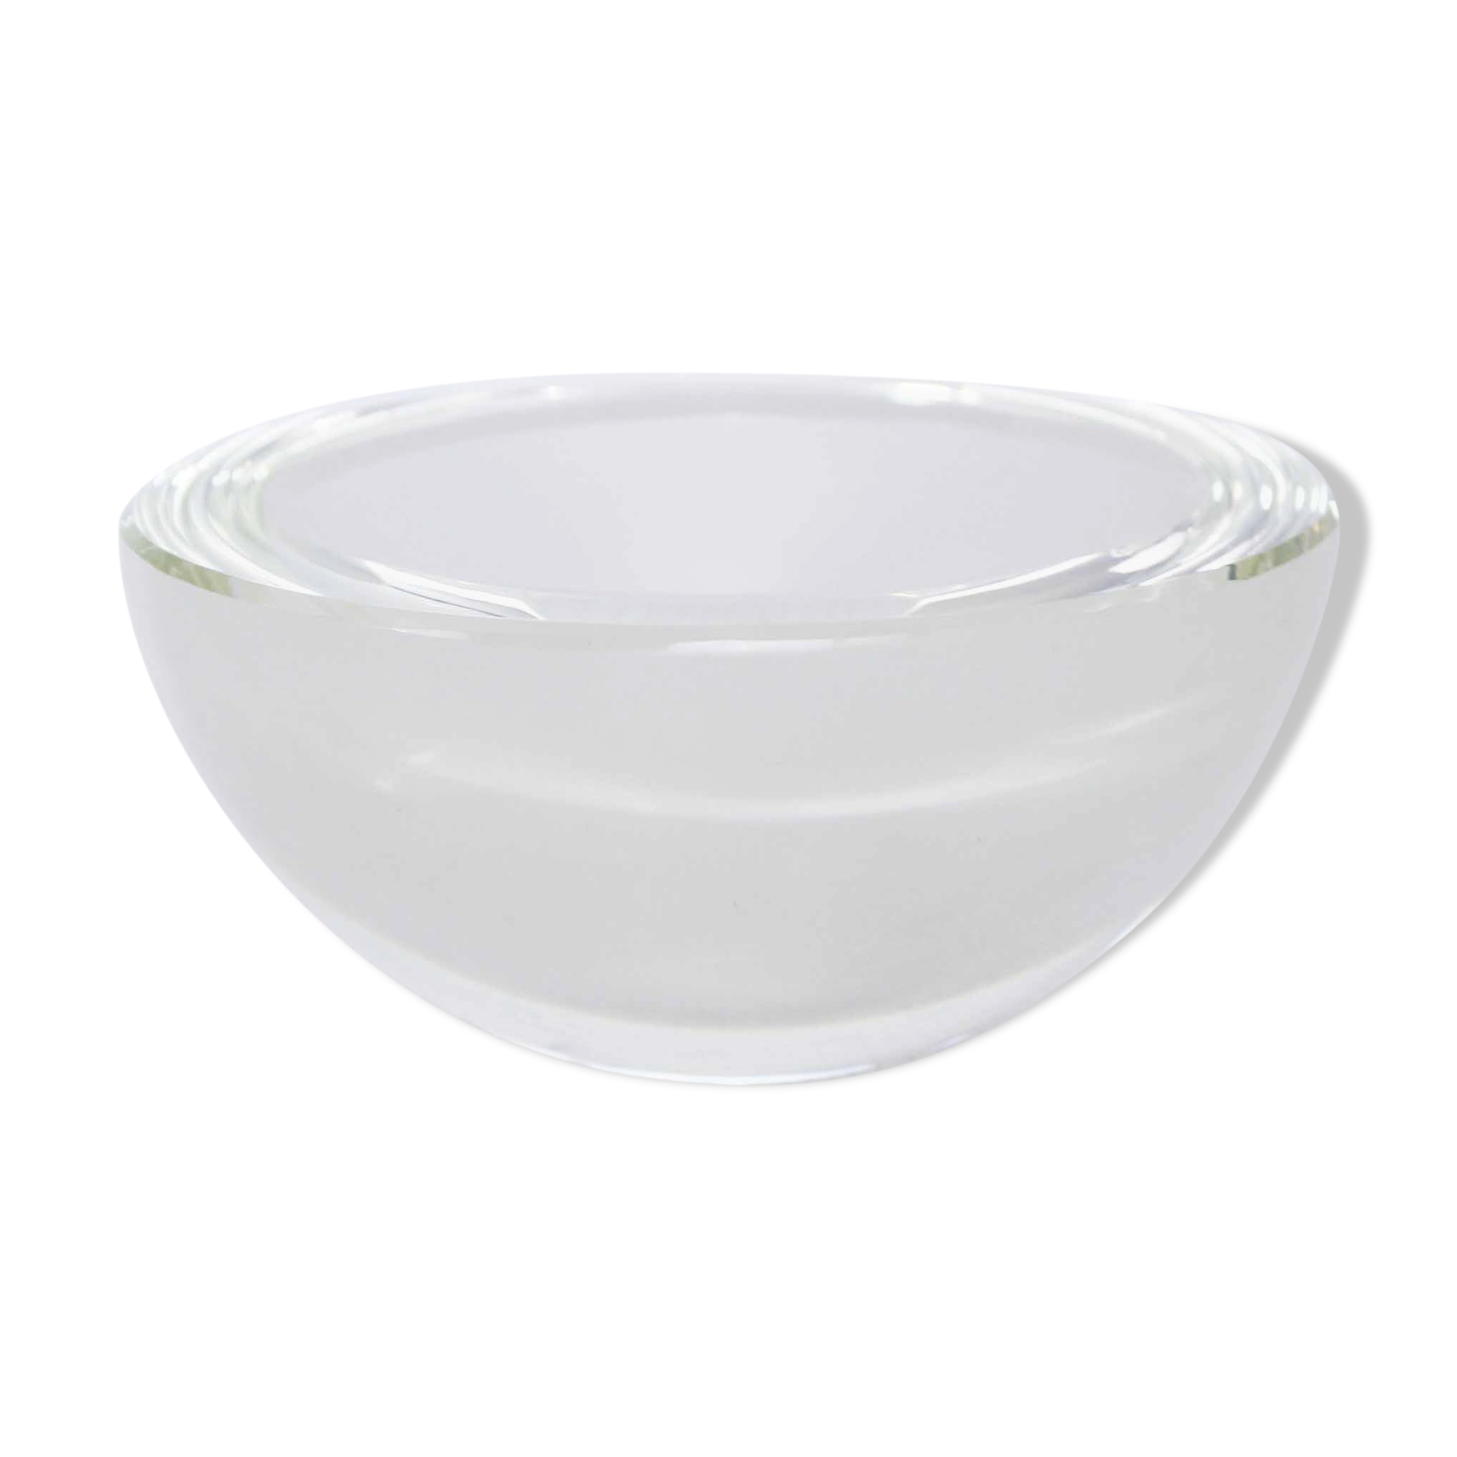 Salad Bowl Rosenthal form without name 